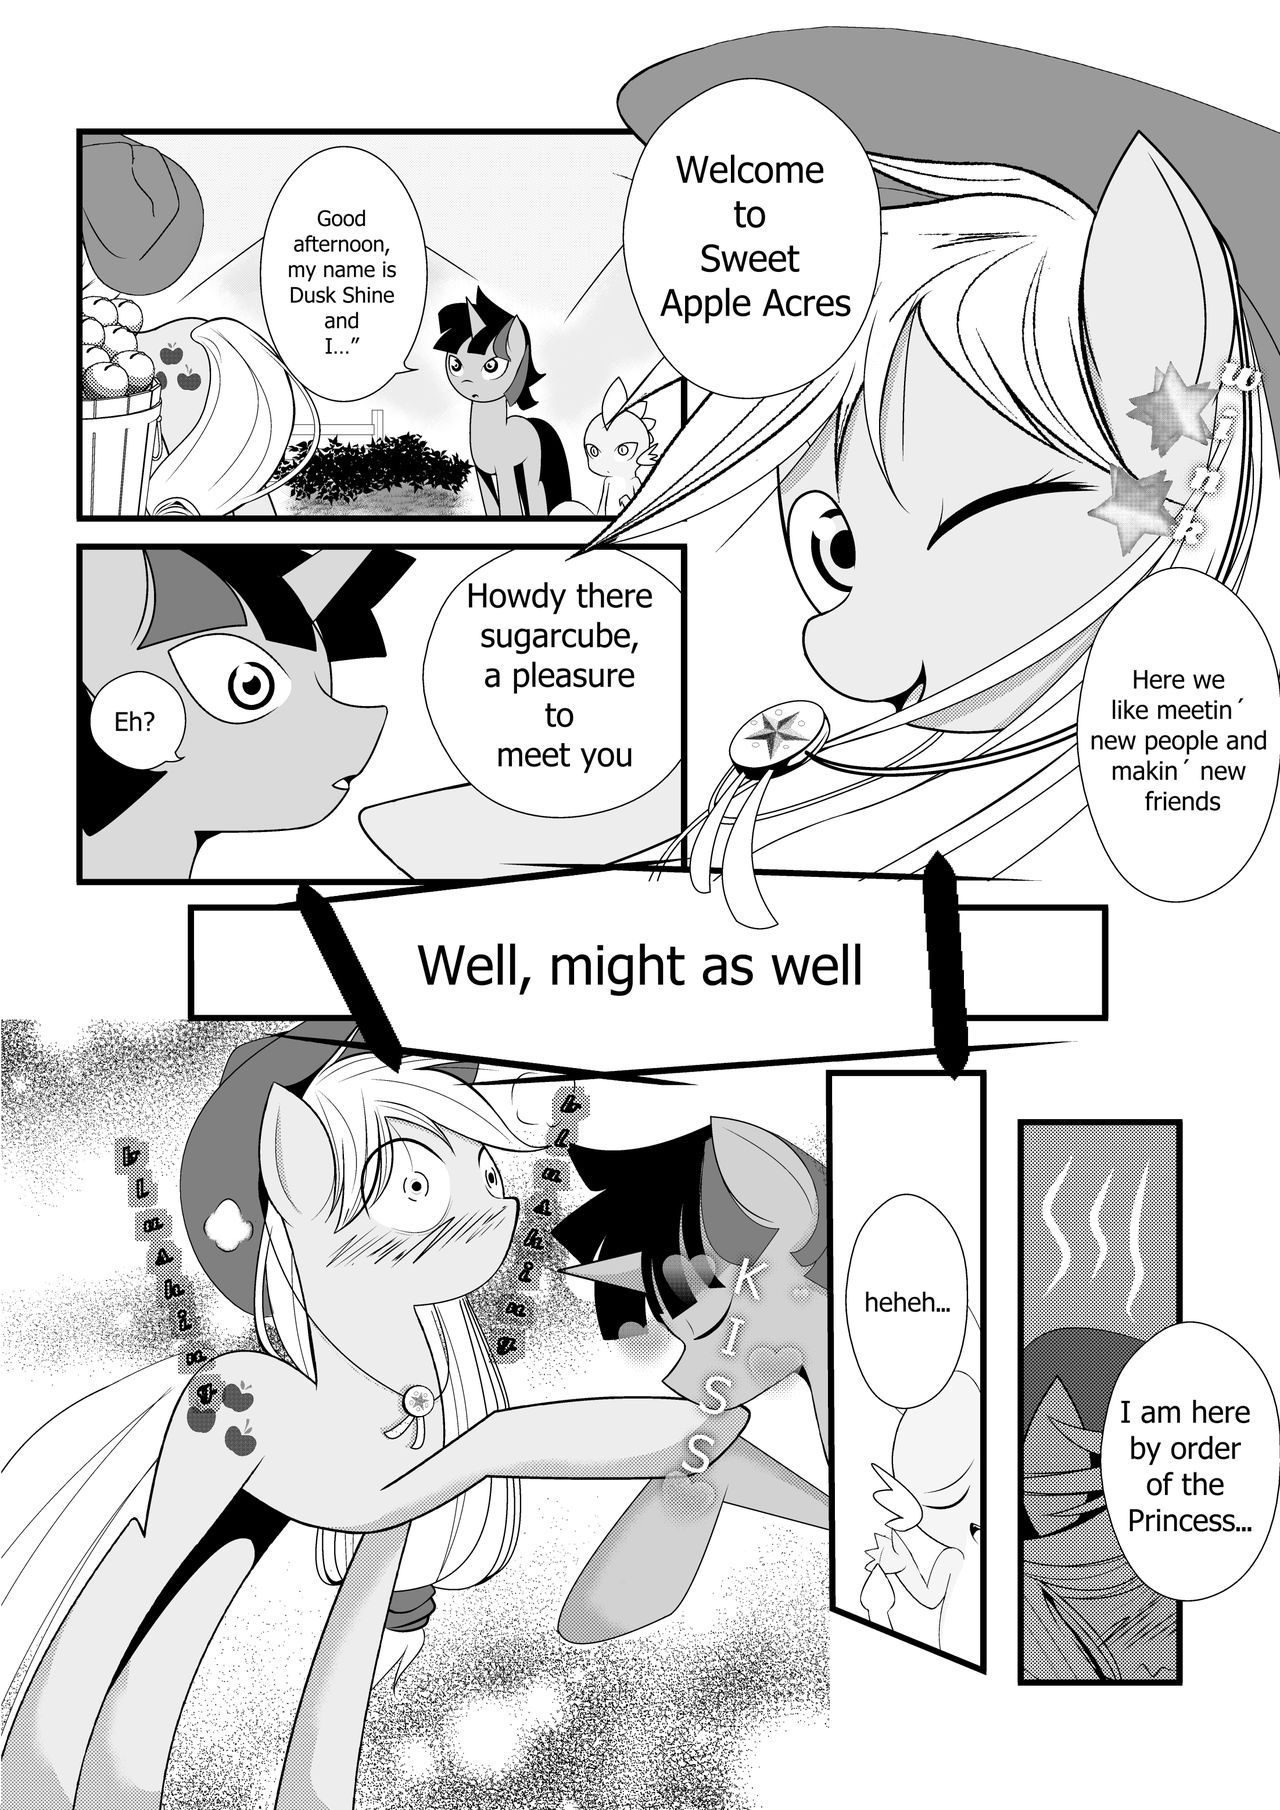 The Unexpected Love Life of Dusk Shine - Hi-Res [ENG] (in progress) 19